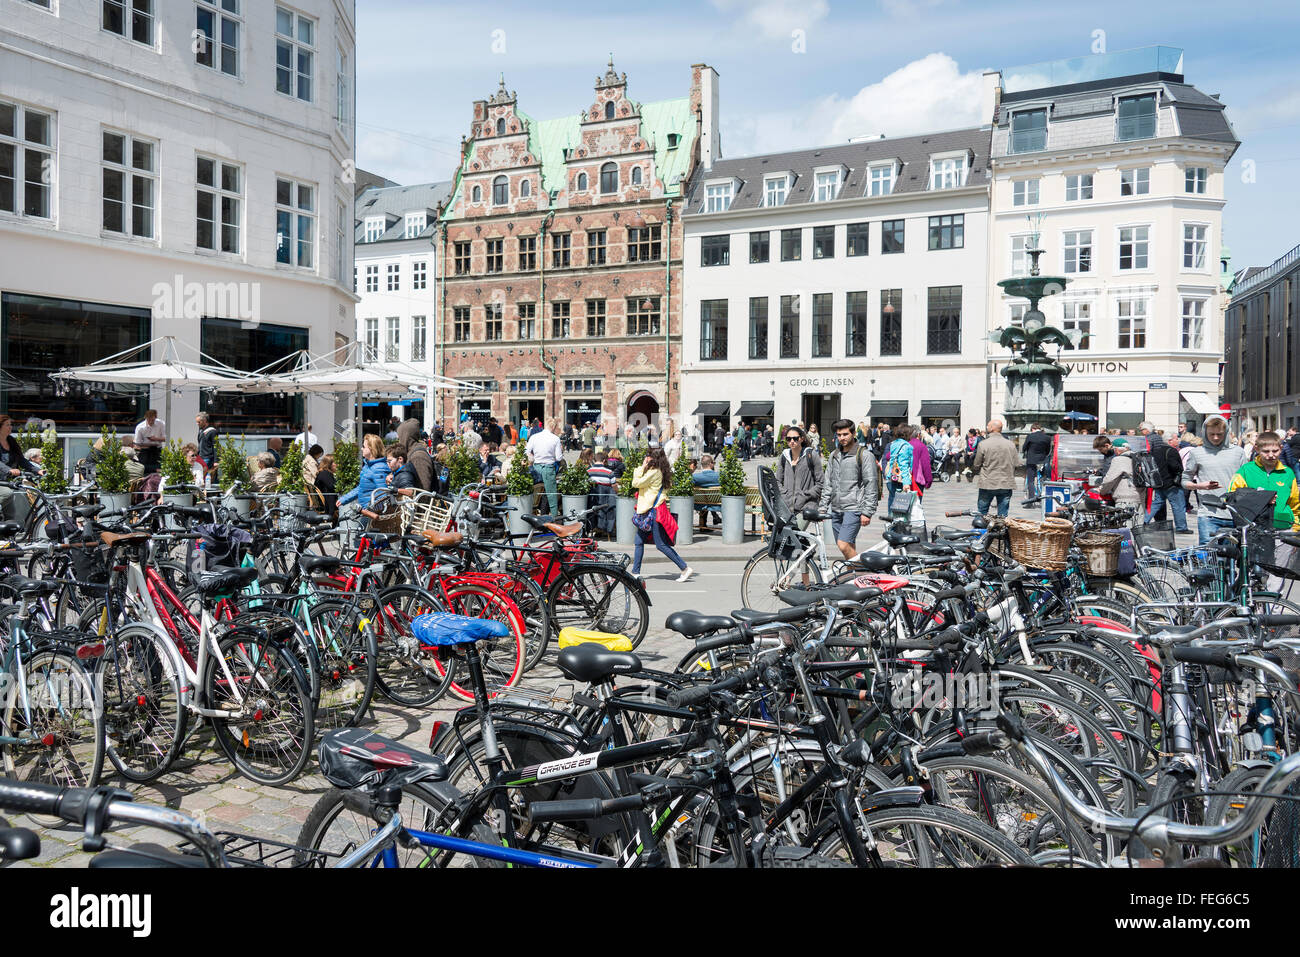 Bicycle Parking Denmark High Resolution Stock Photography and Images - Alamy